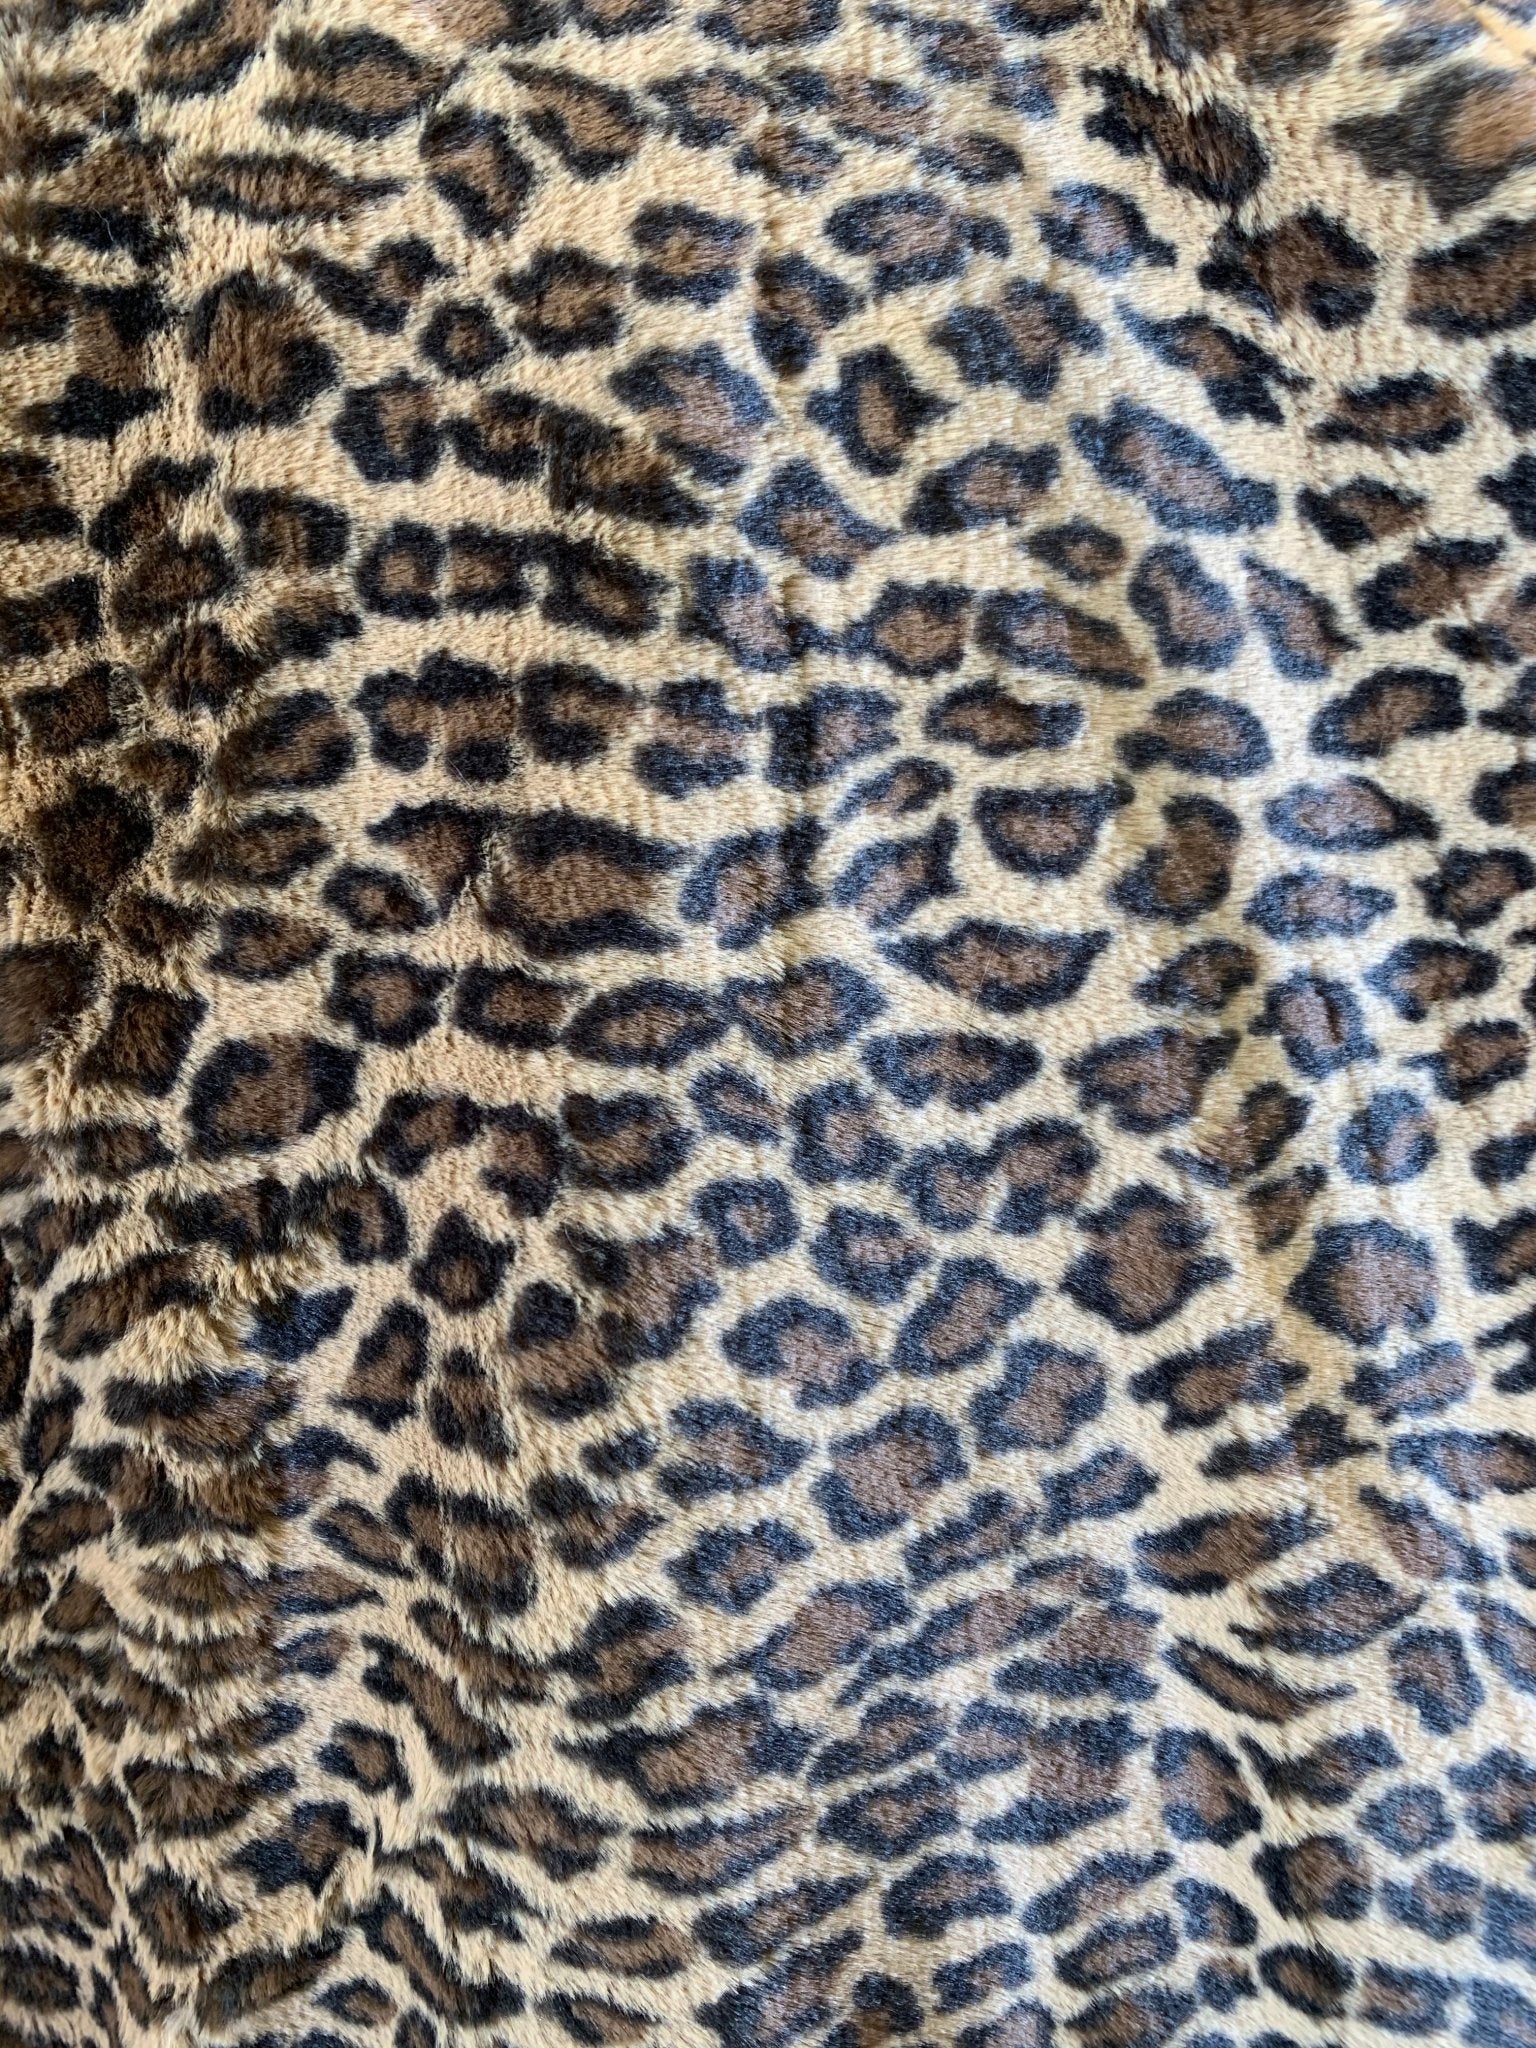 Leopard Fake Faux Fur Fabric By The Yard - Faux Fur Material Fashion FabricICEFABRICICE FABRICSCoffee BrownBy The Yard (60 inches Wide)Leopard Fake Faux Fur Fabric By The Yard - Faux Fur Material Fashion Fabric ICEFABRIC Coffee Brown